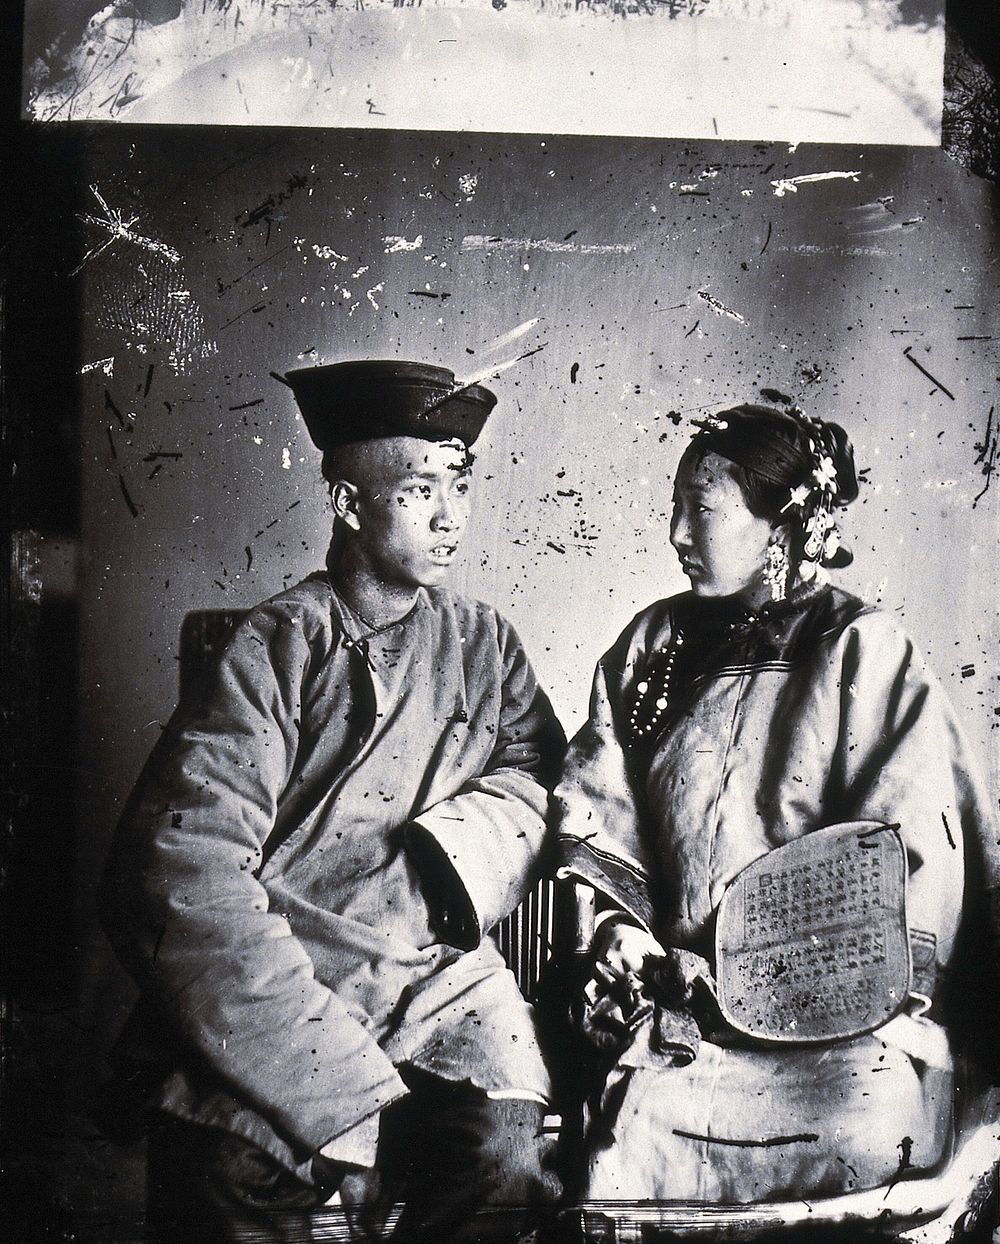 China. Photograph, 1981, from a negative by John Thomson, 1869.